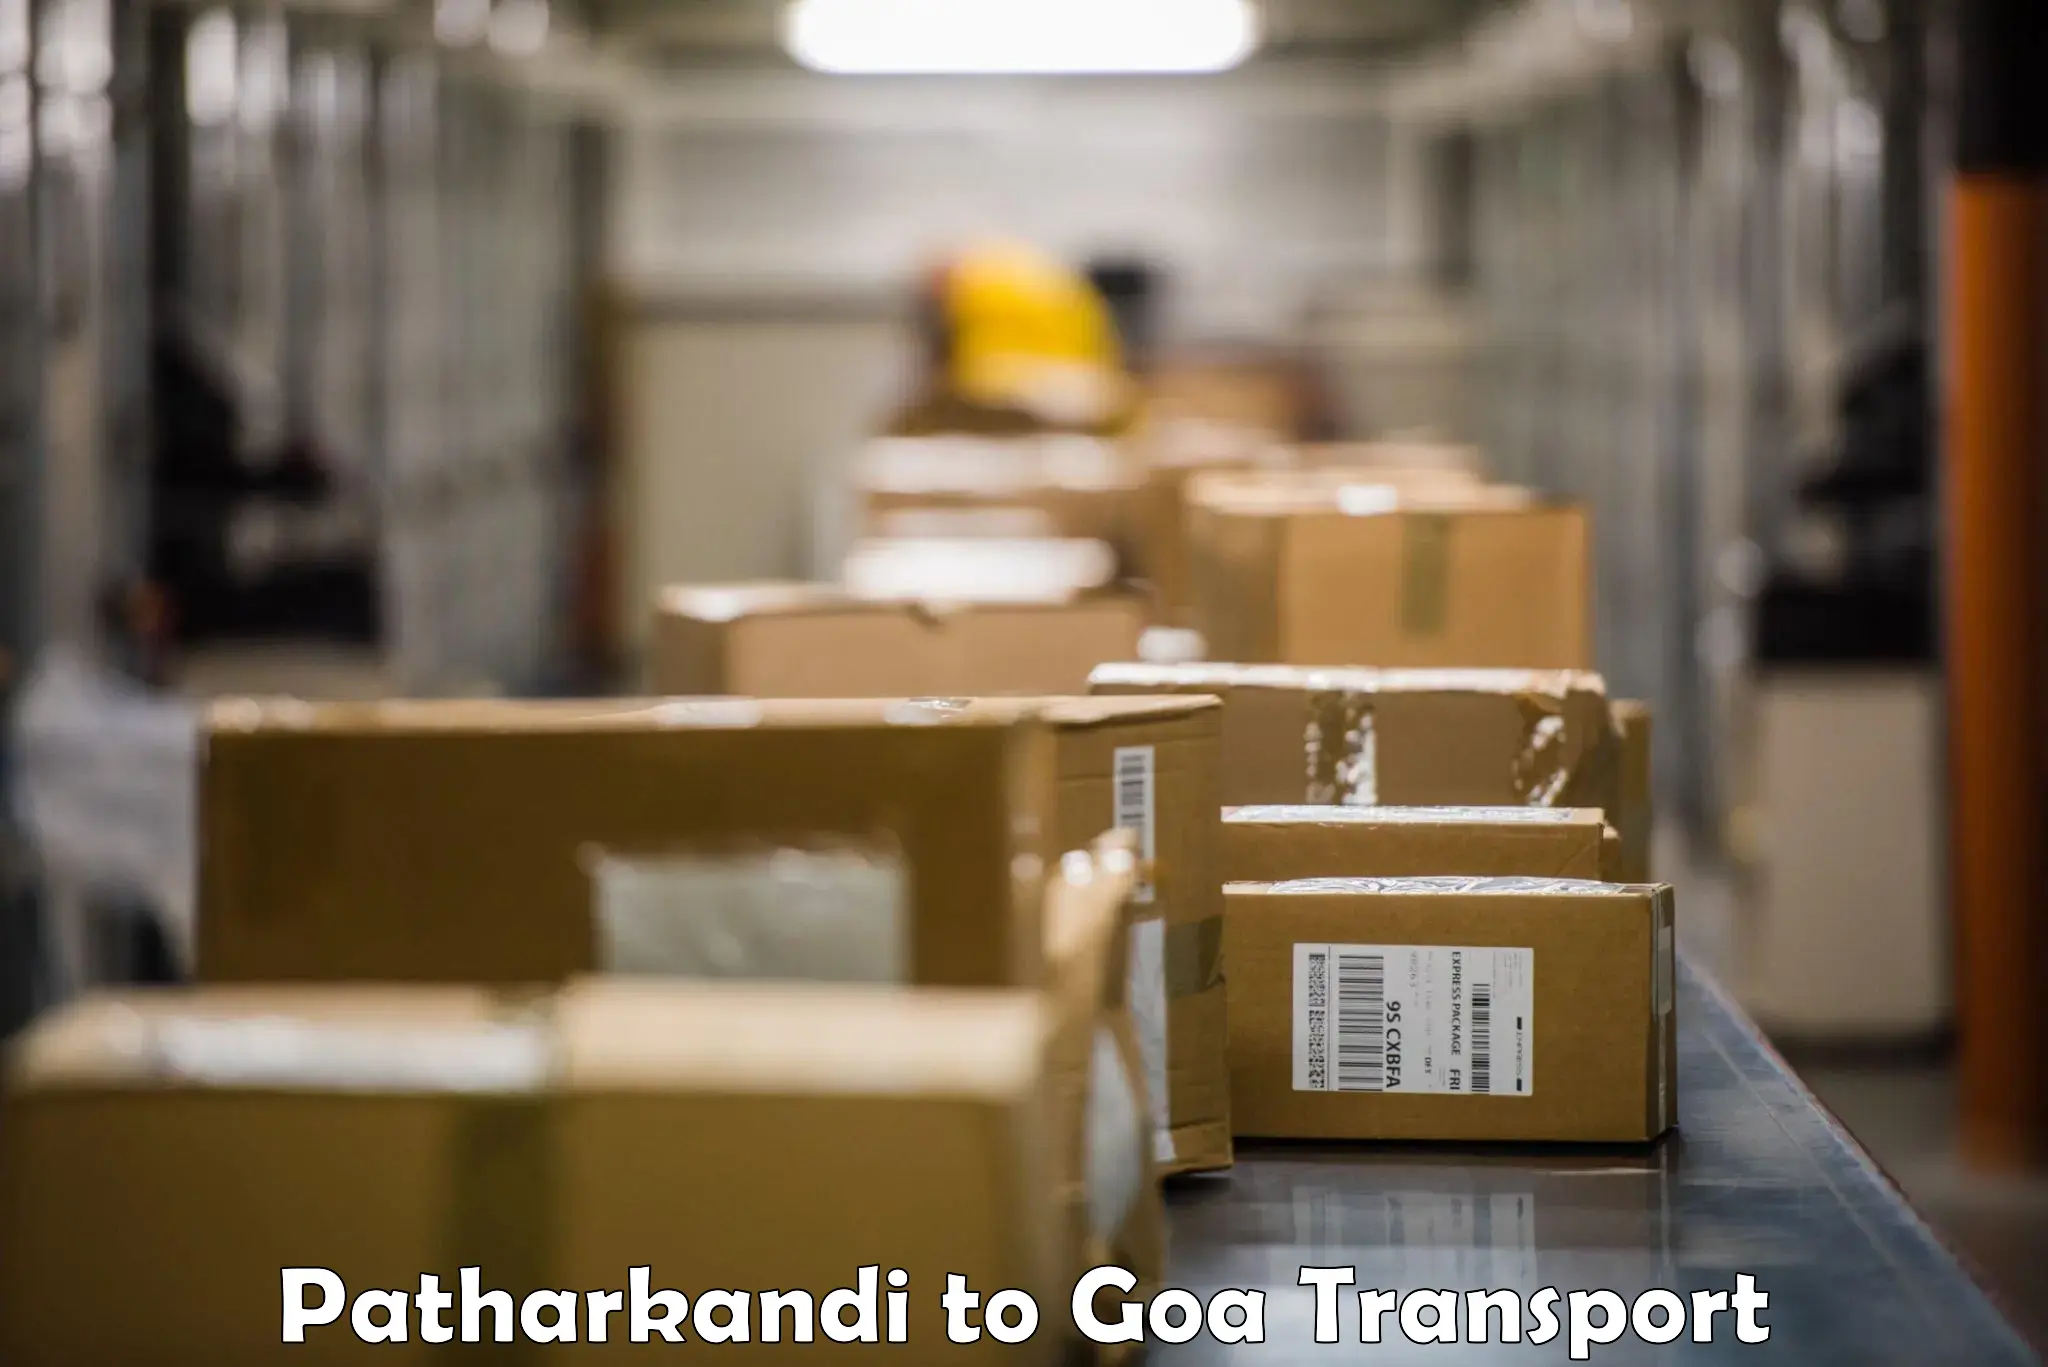 Transport bike from one state to another Patharkandi to Mormugao Port